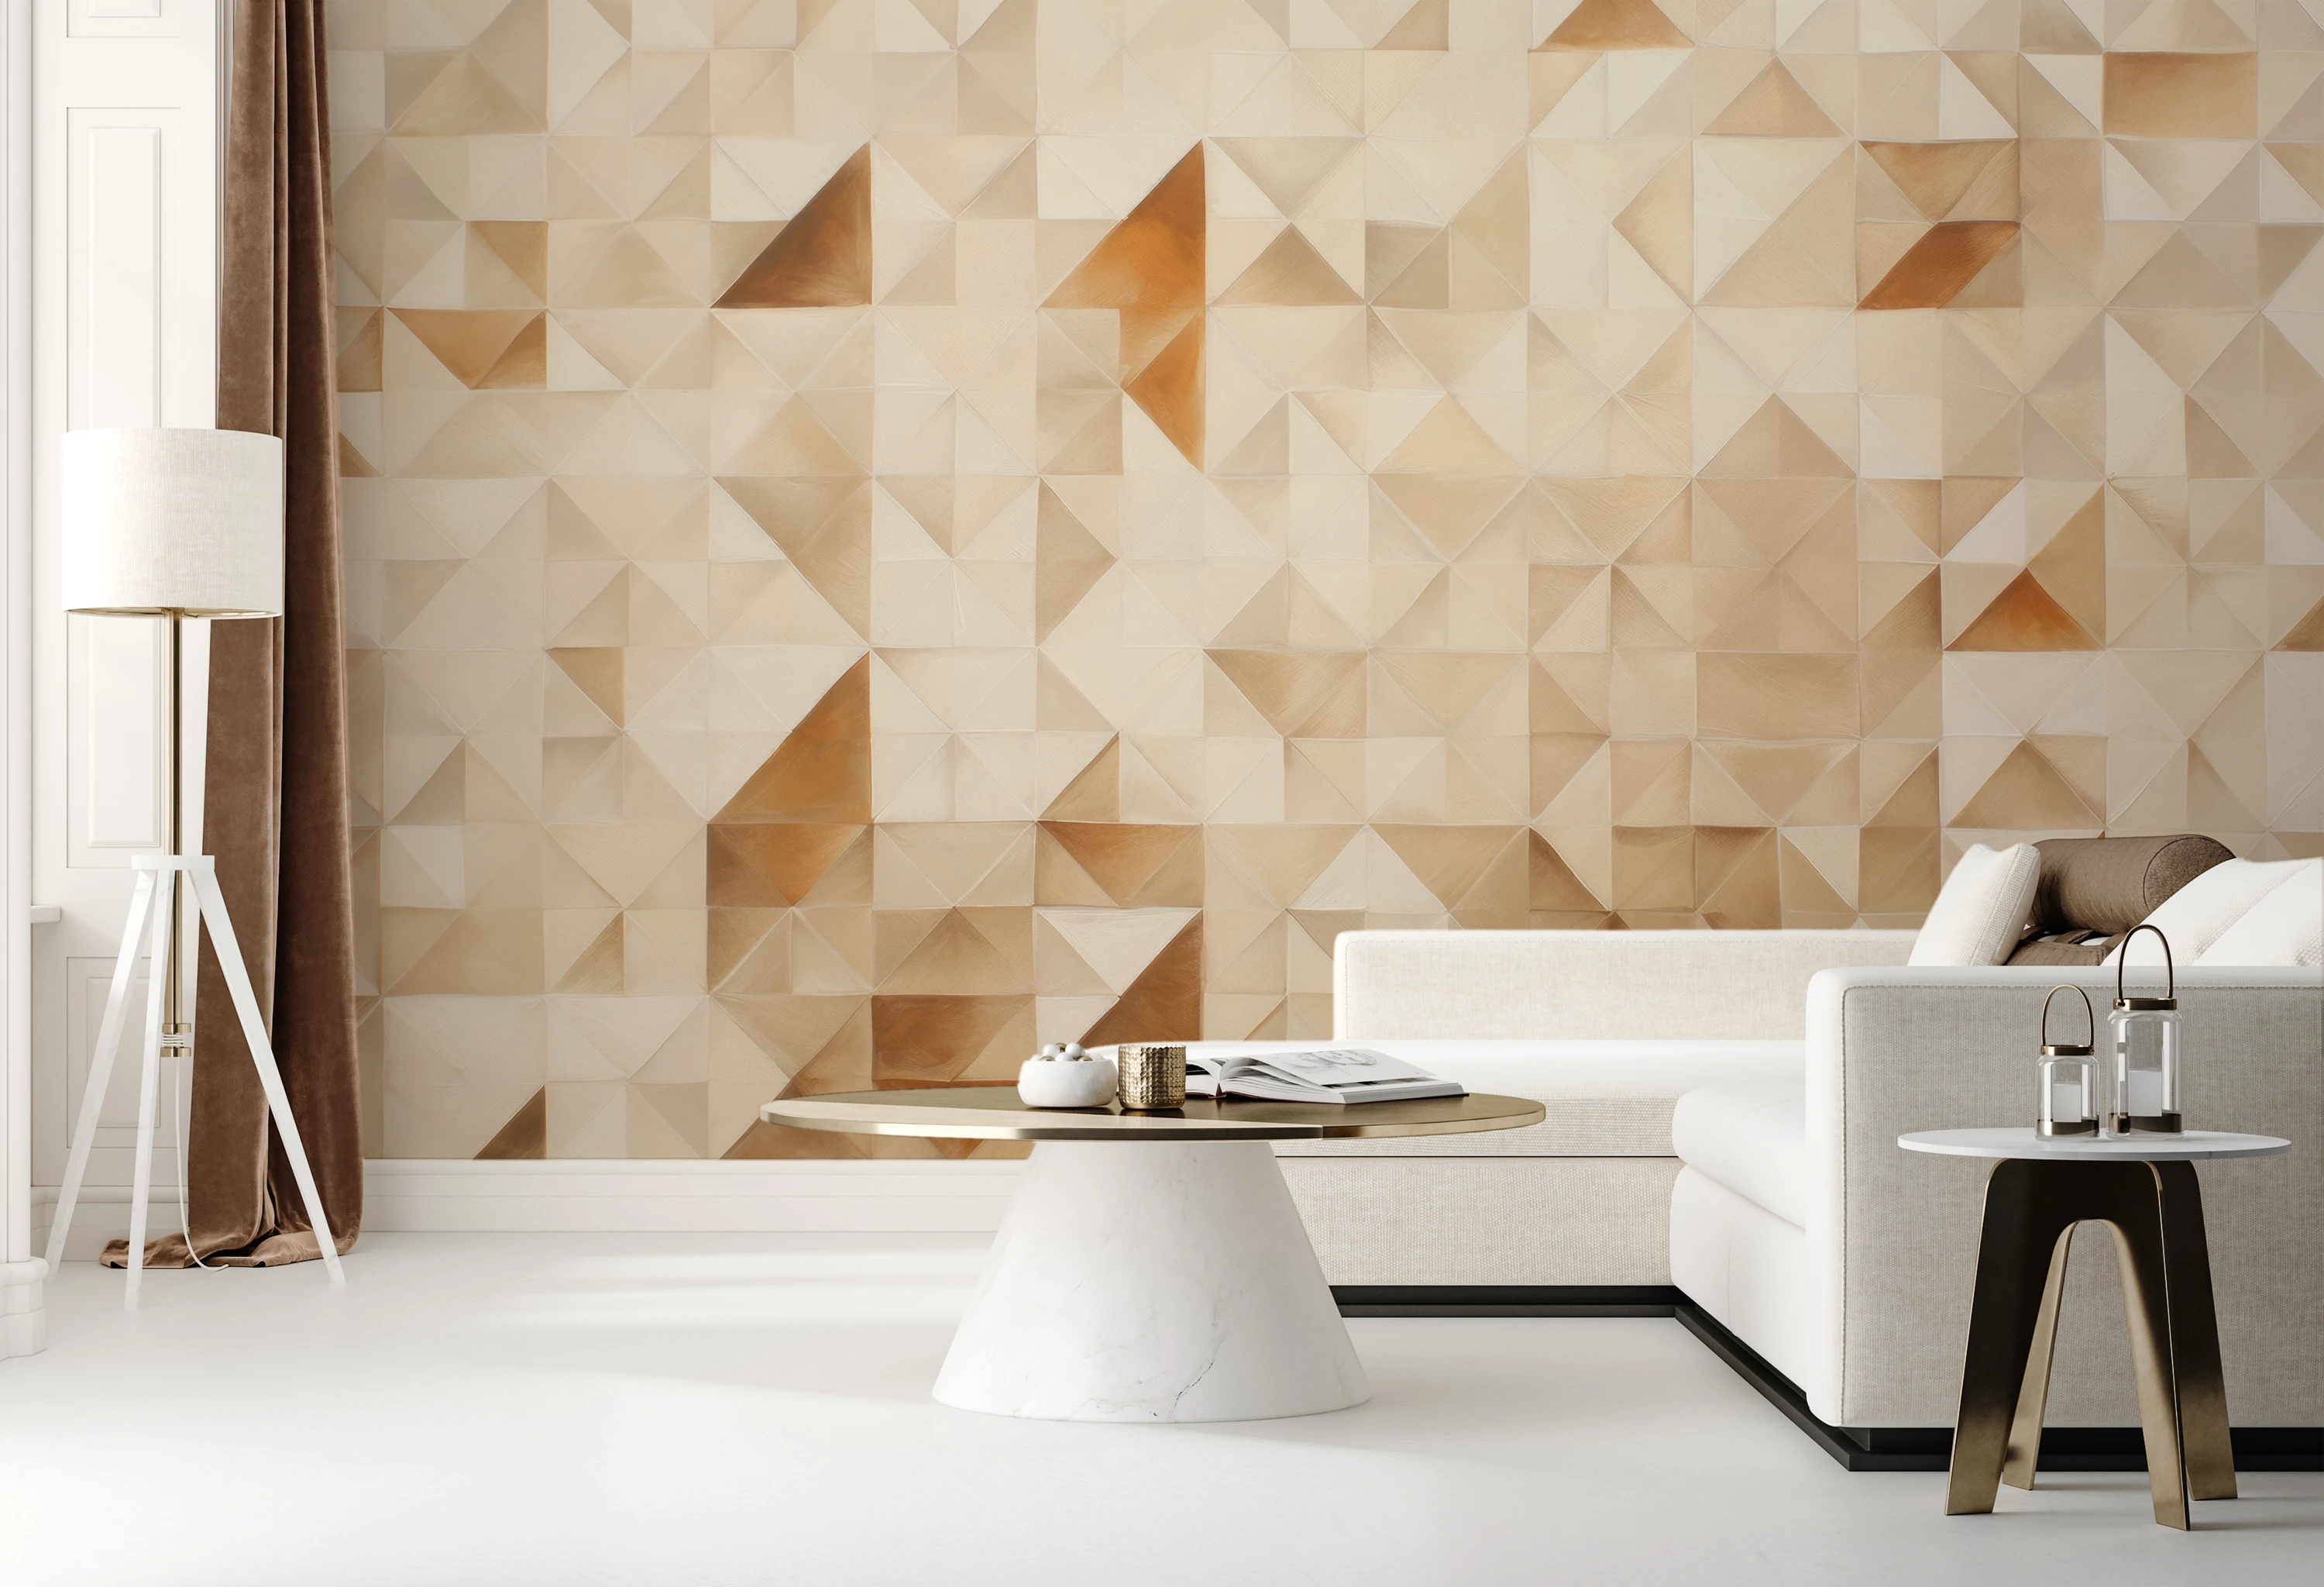 An abstract pattern resembling mountain peaks, made in a warm beige palette, creating a three-dimensional impression.